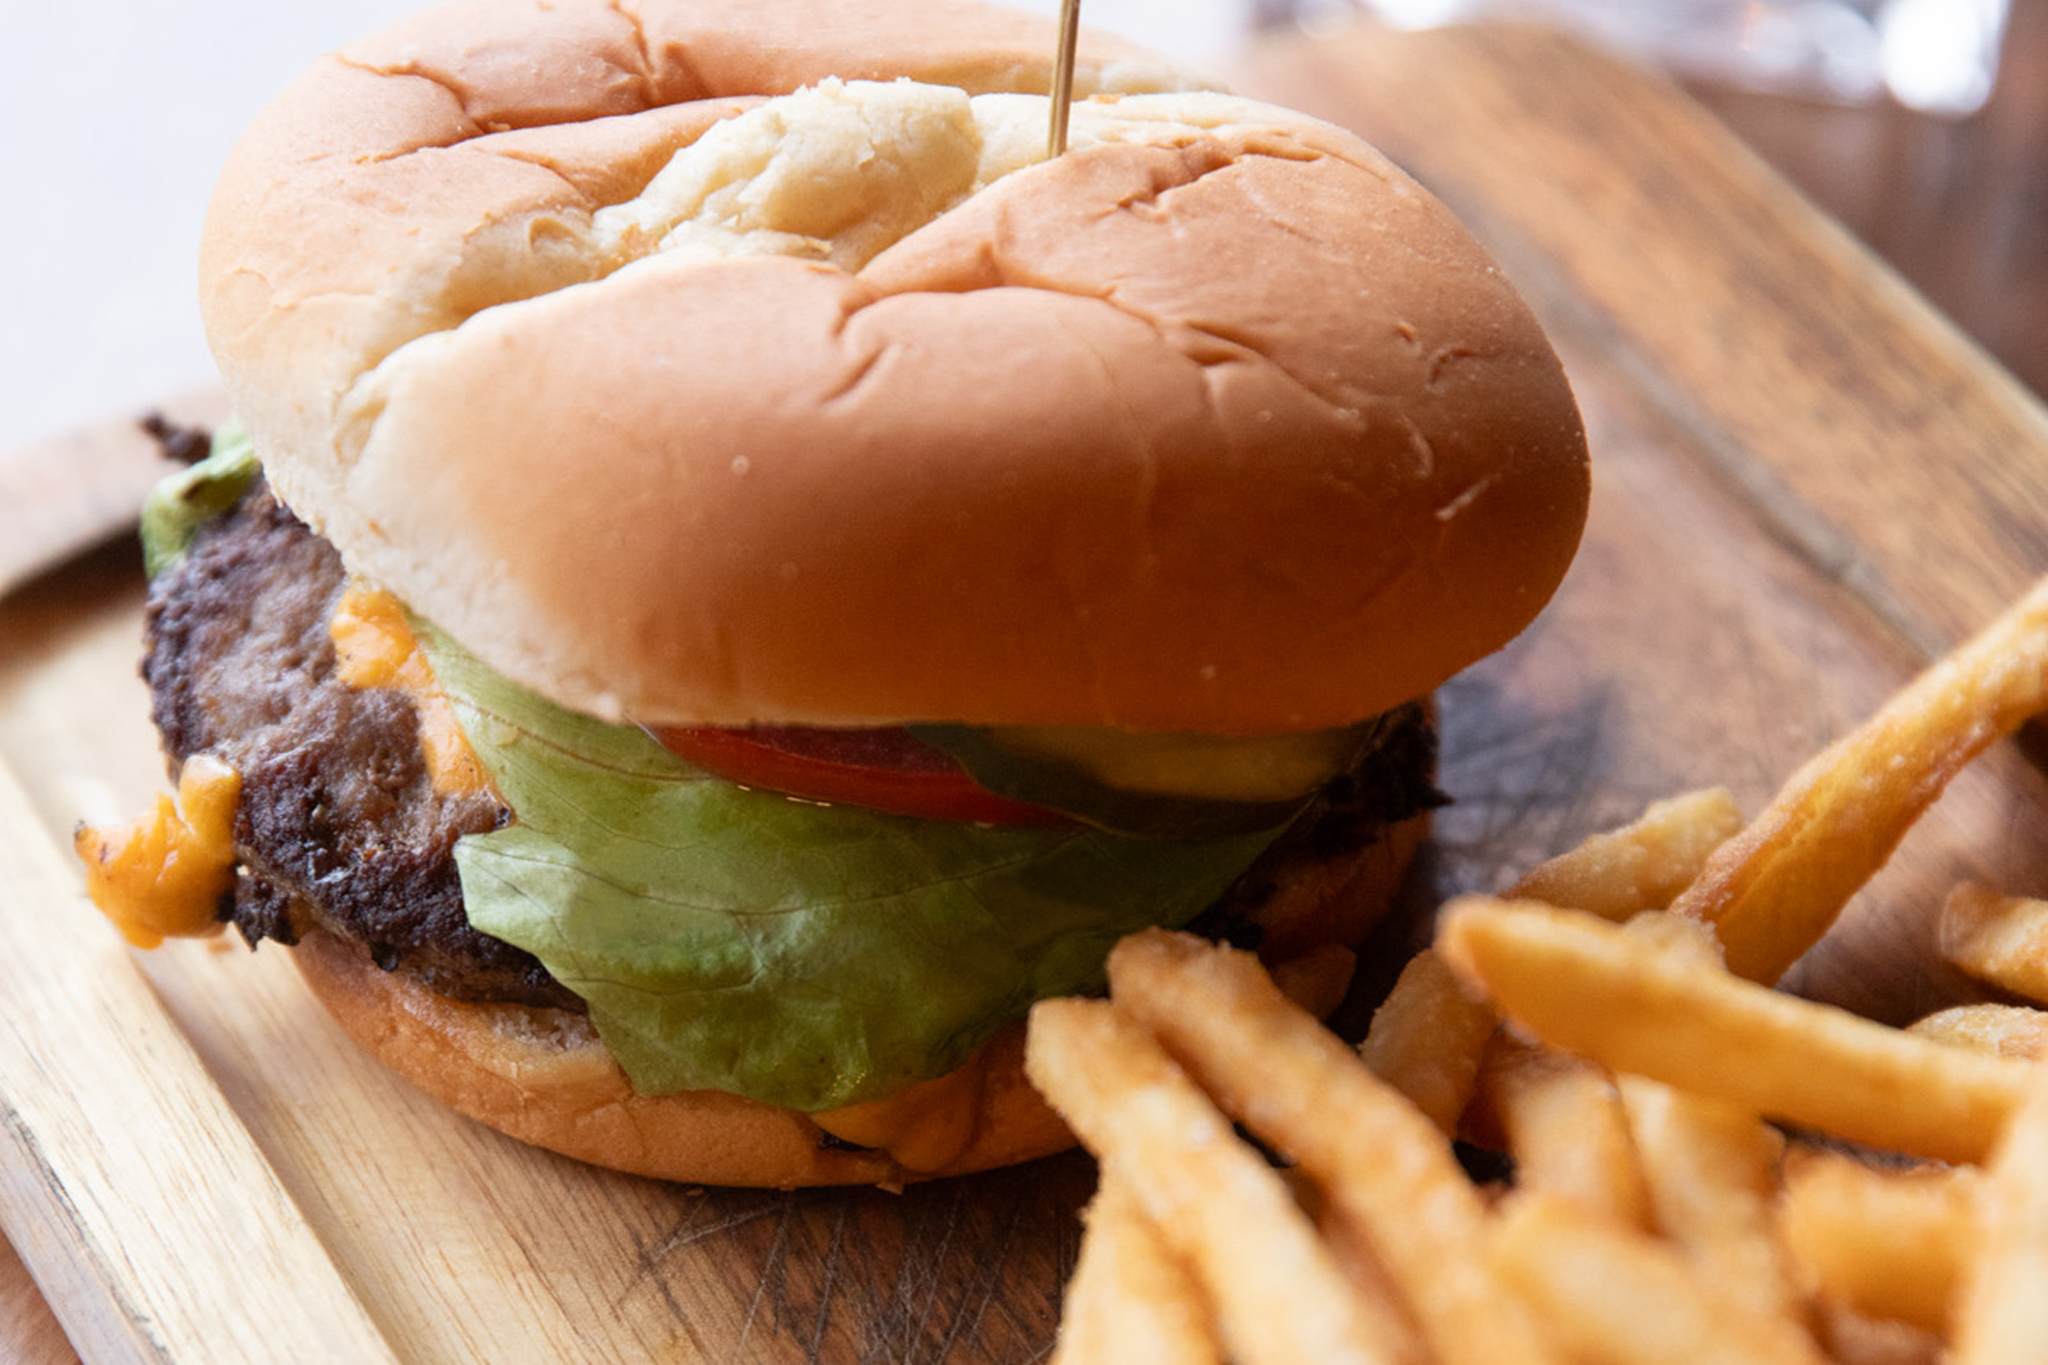 The Boat Club Burger will satisfy the heartiest of Montana-sized appetites!